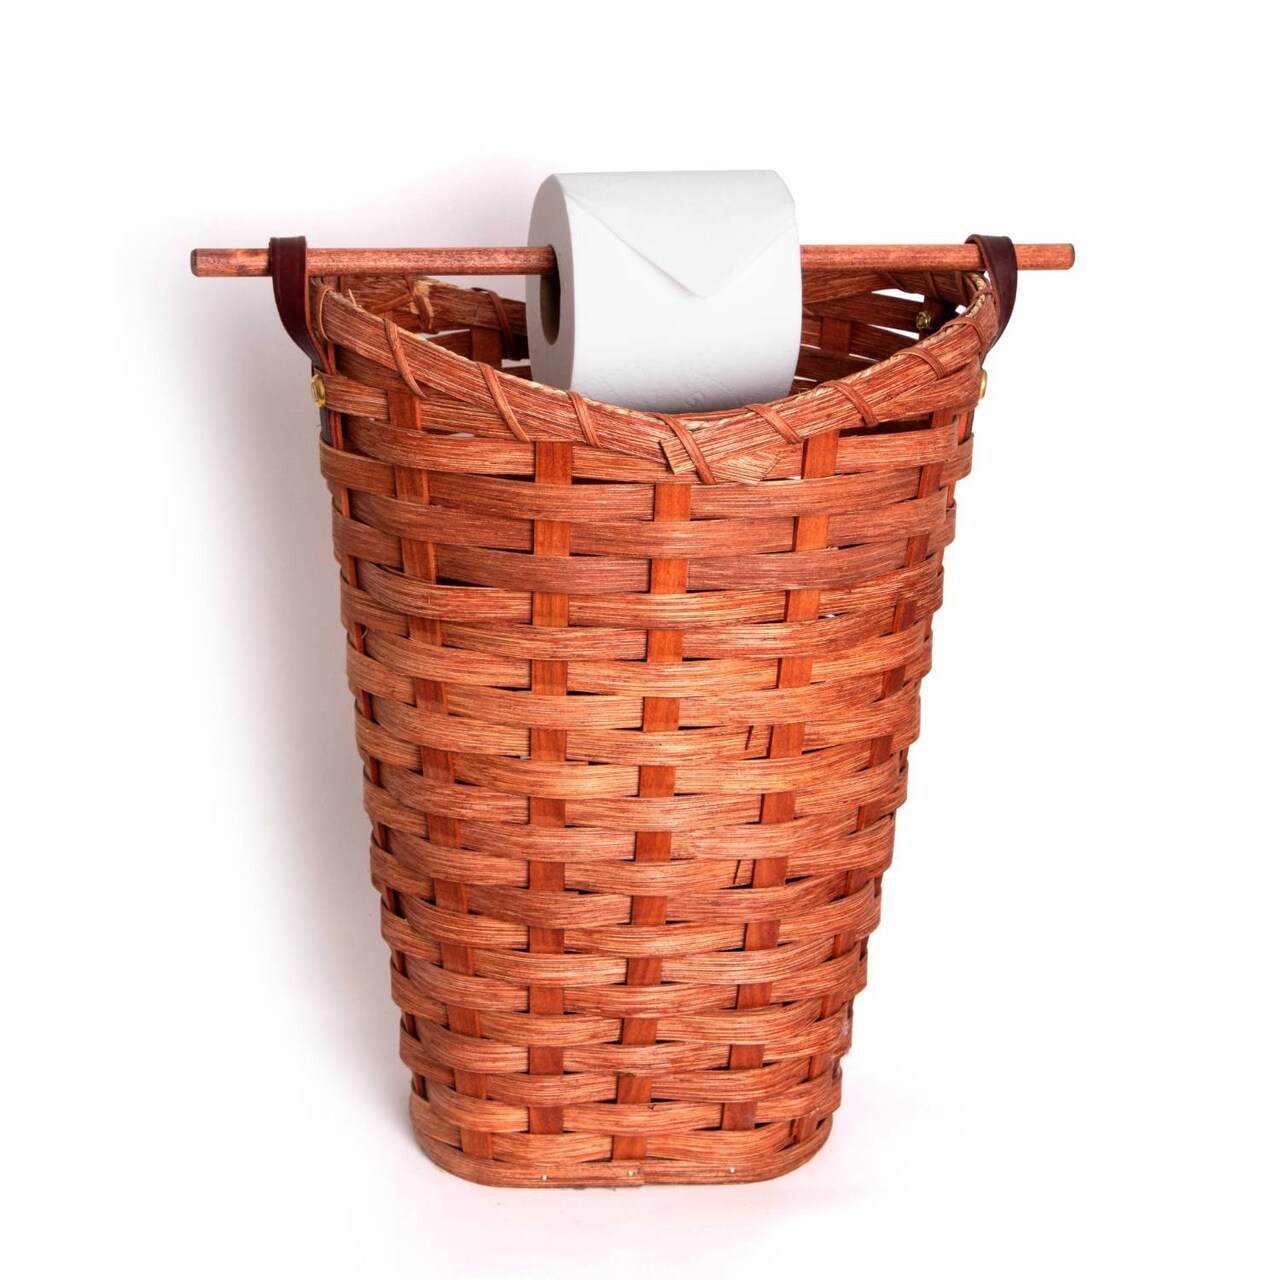 Toilet Paper Roll Holder and Dispenser, Amish Made Handcrafted Woven Maple  Toilet Paper Basket Holds 4 Rolls, 16.5 Inches High